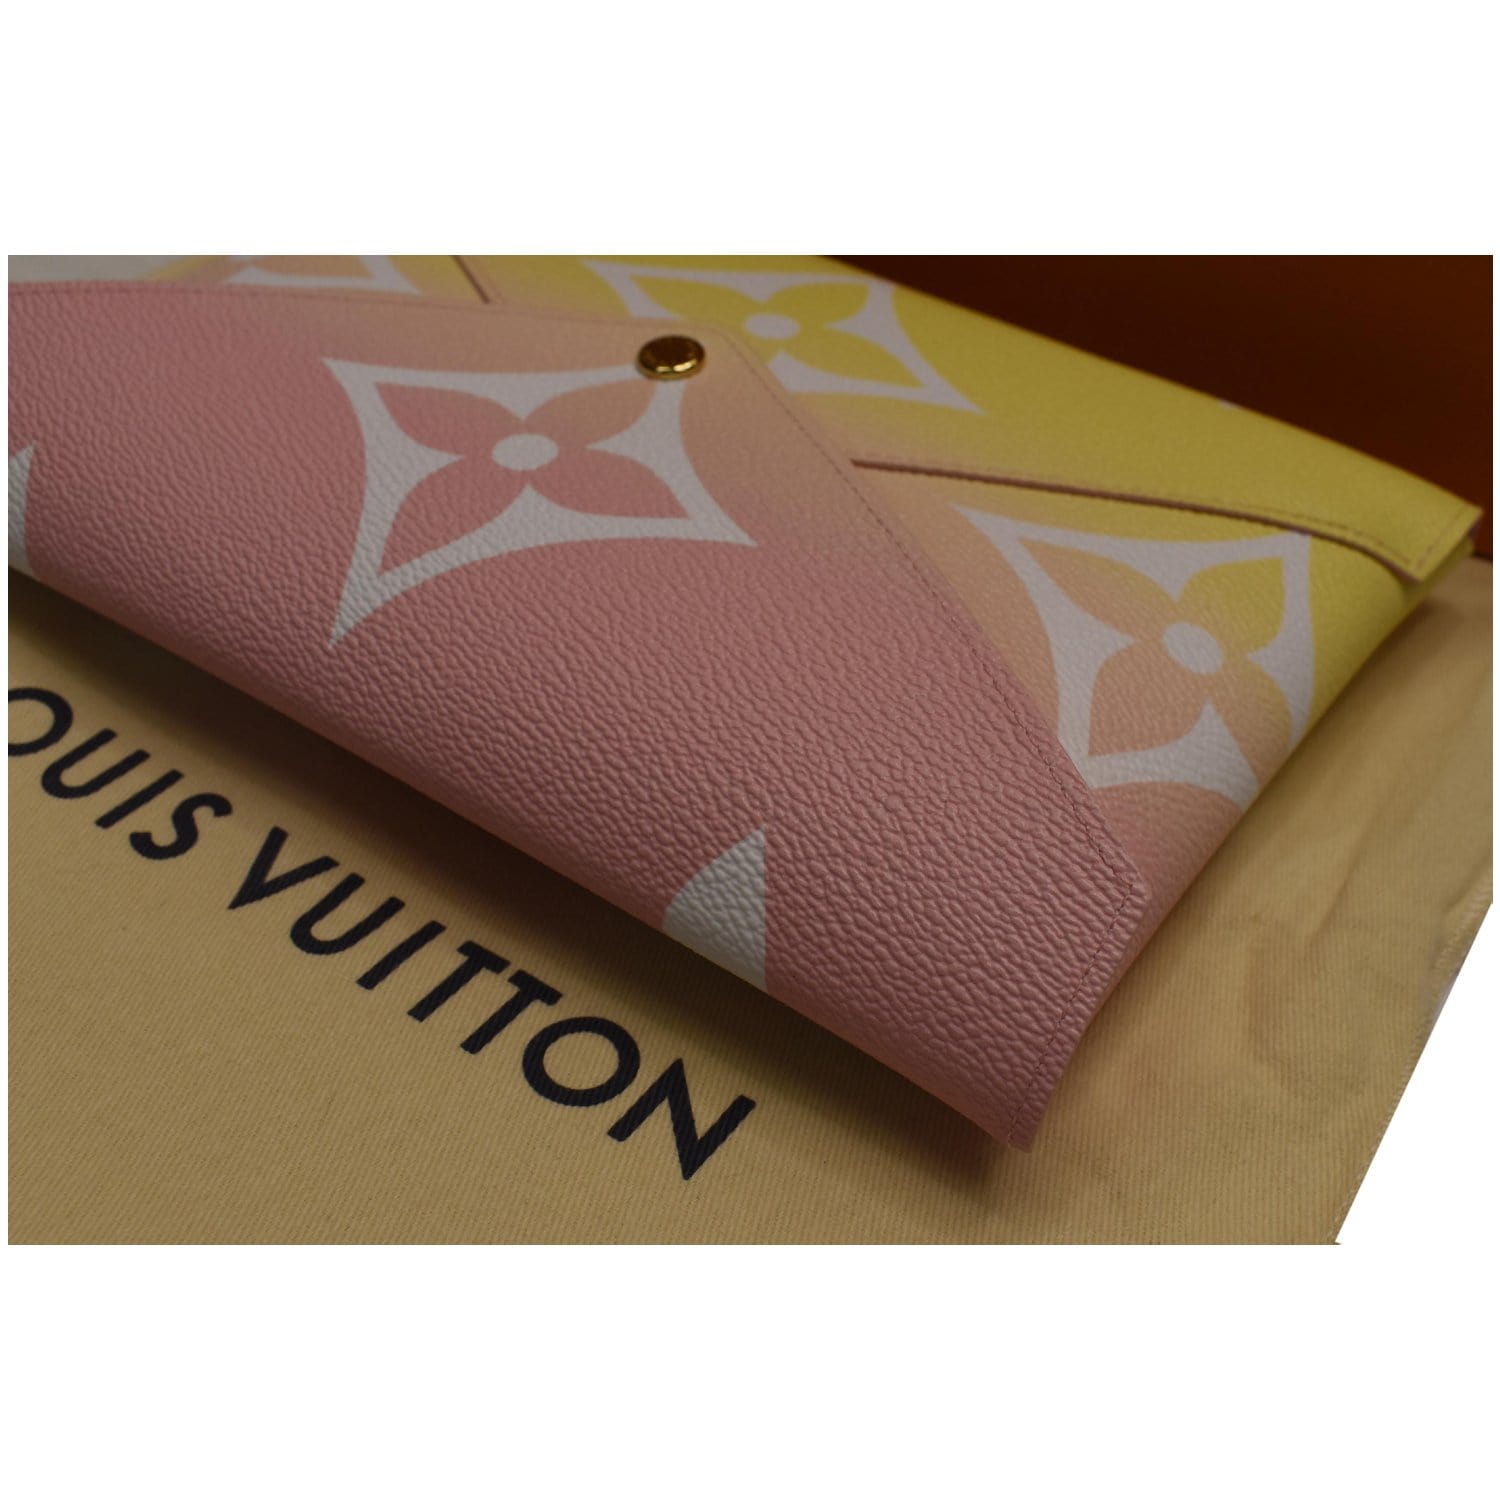 Louis Vuitton Monogram Giant by The Pool Large Kirigami Pochette Pink